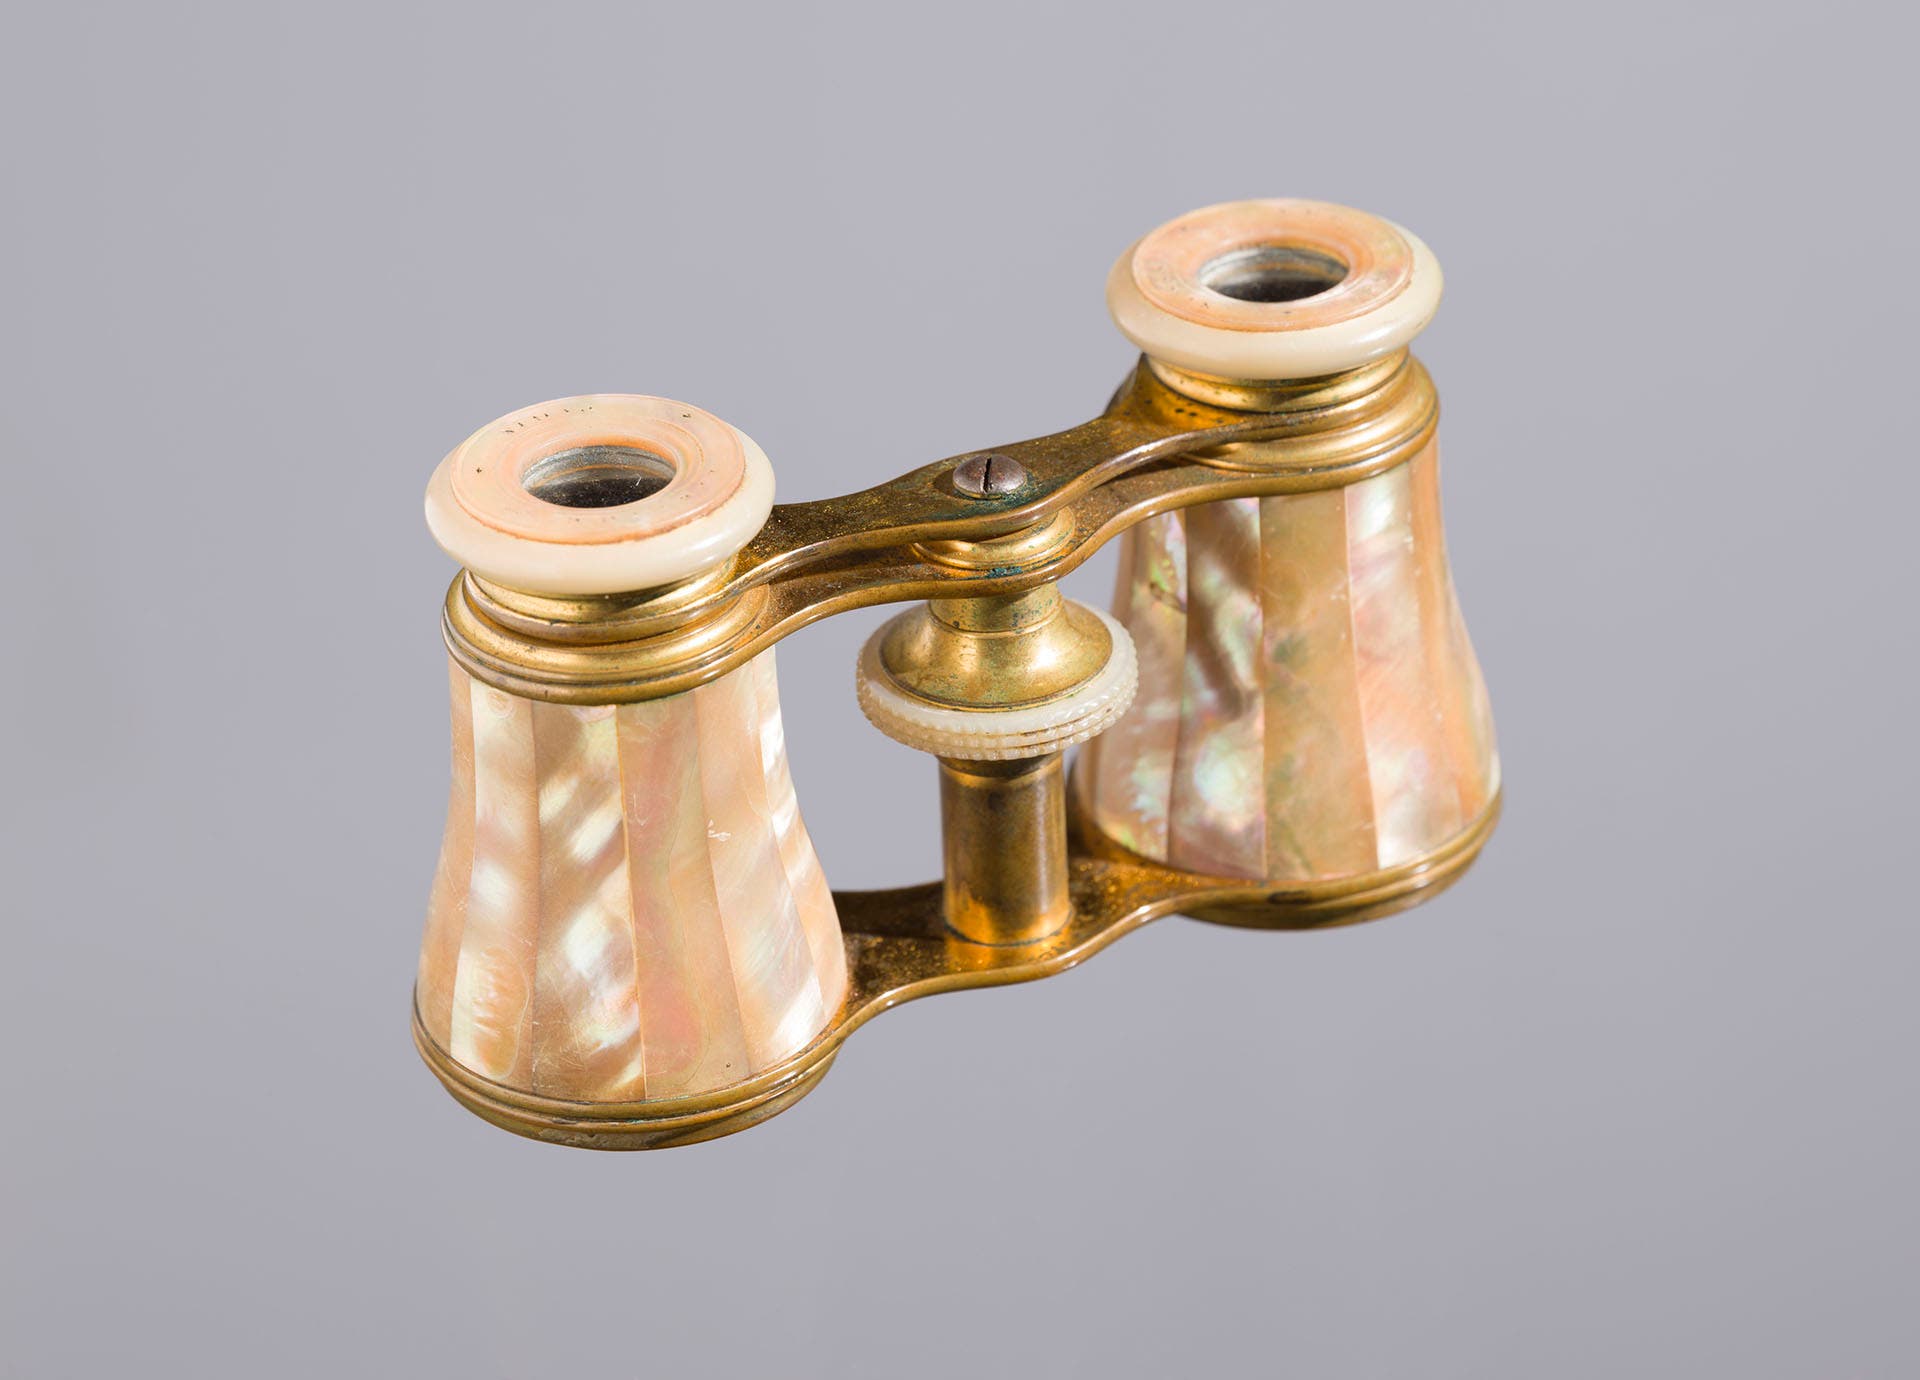 Opera glasses owned by Mary Church Terrell.